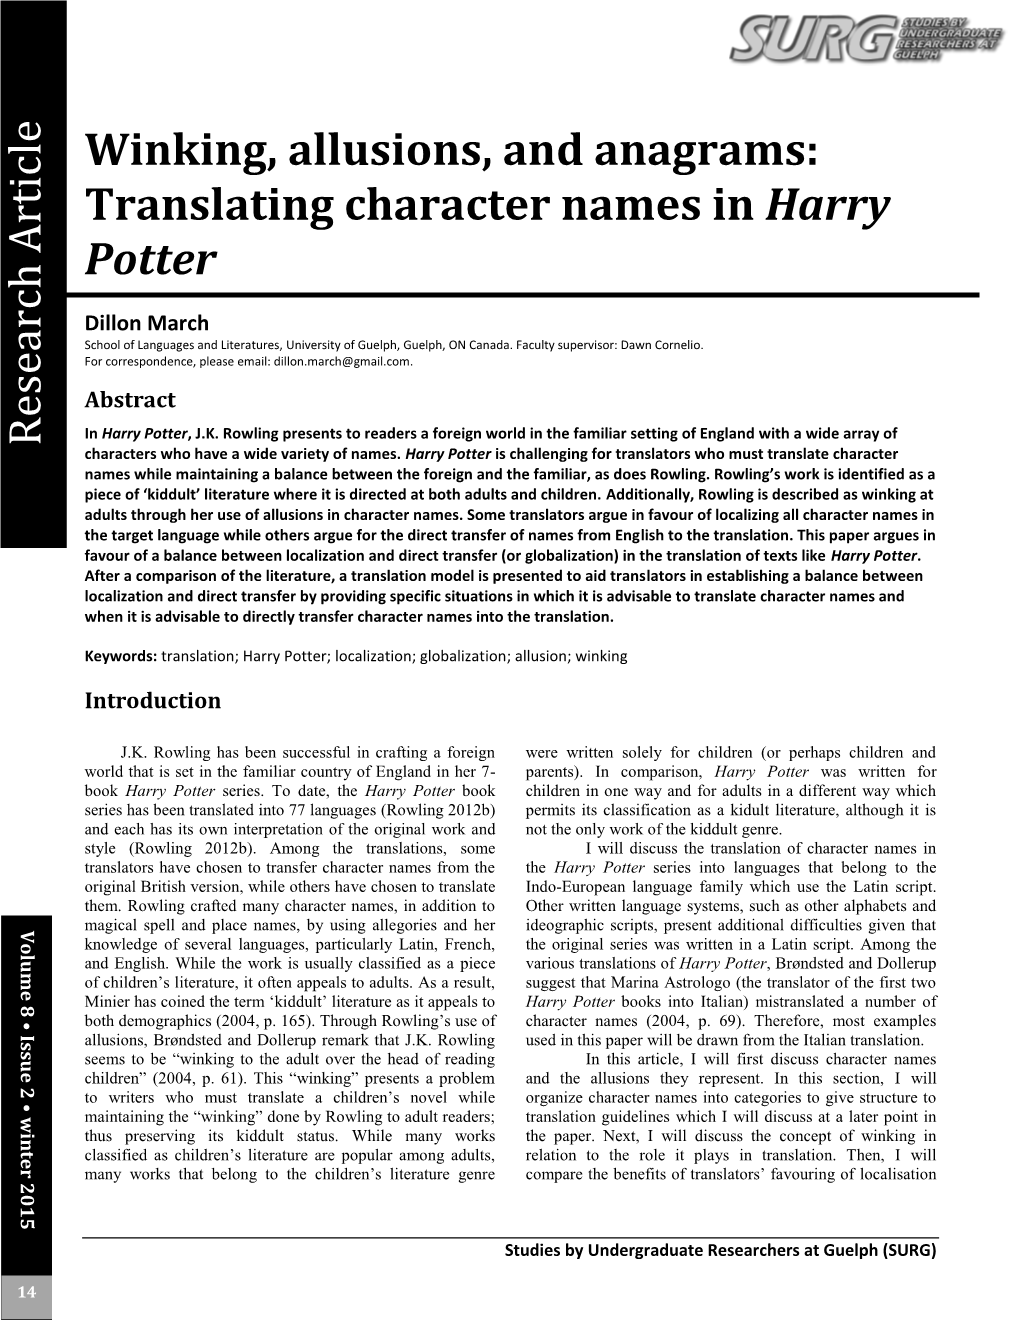 Translating Character Names in Harry Potter Research Article